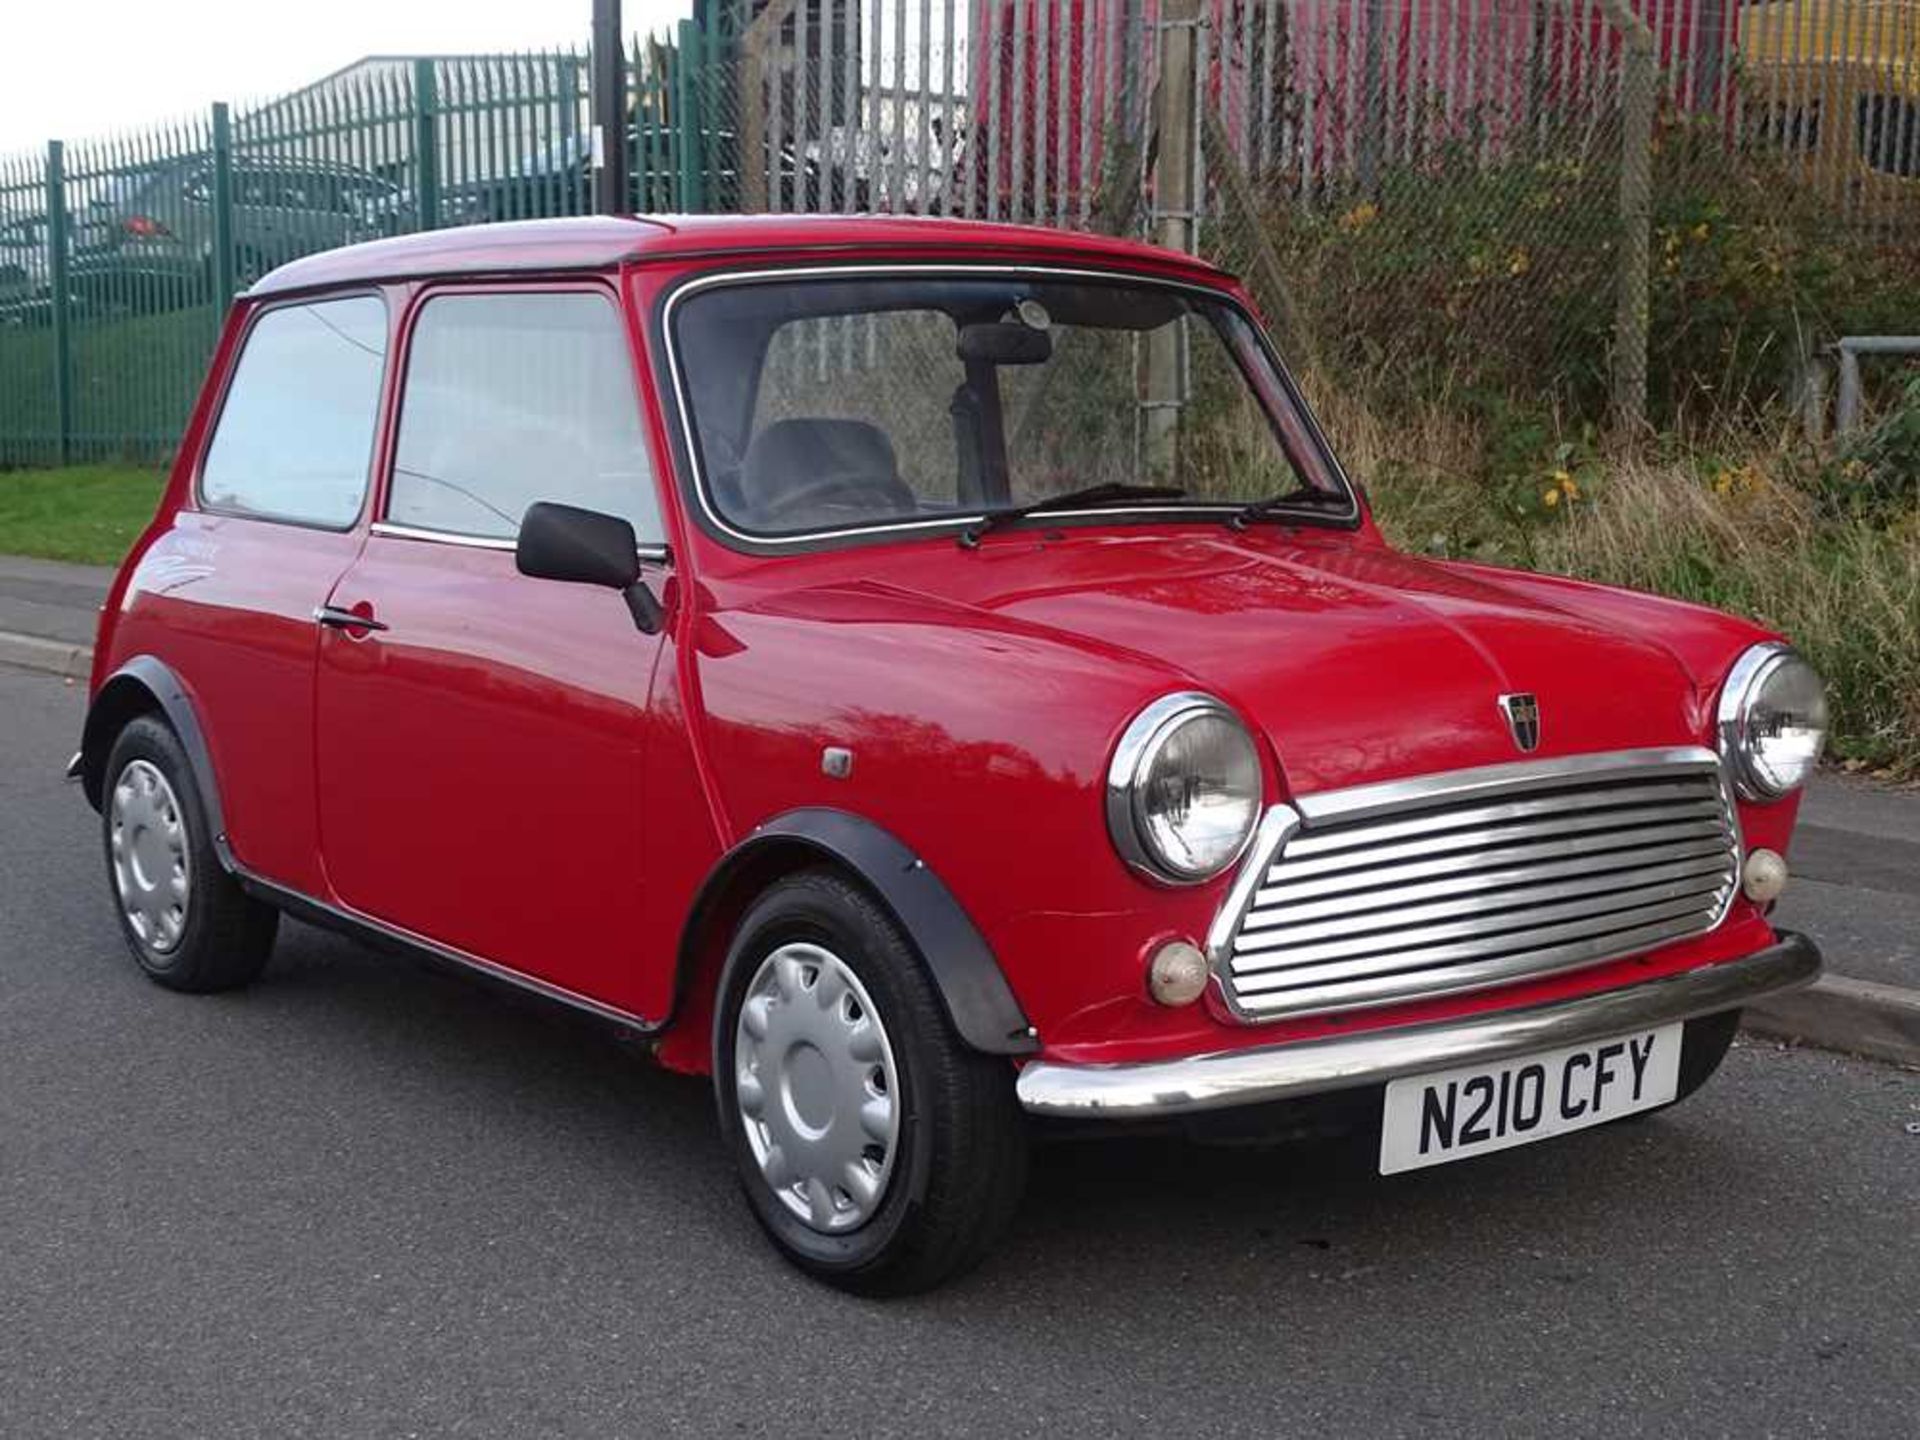 1995 Rover Mini Sprite Only c.22,500 miles from new - Image 2 of 52